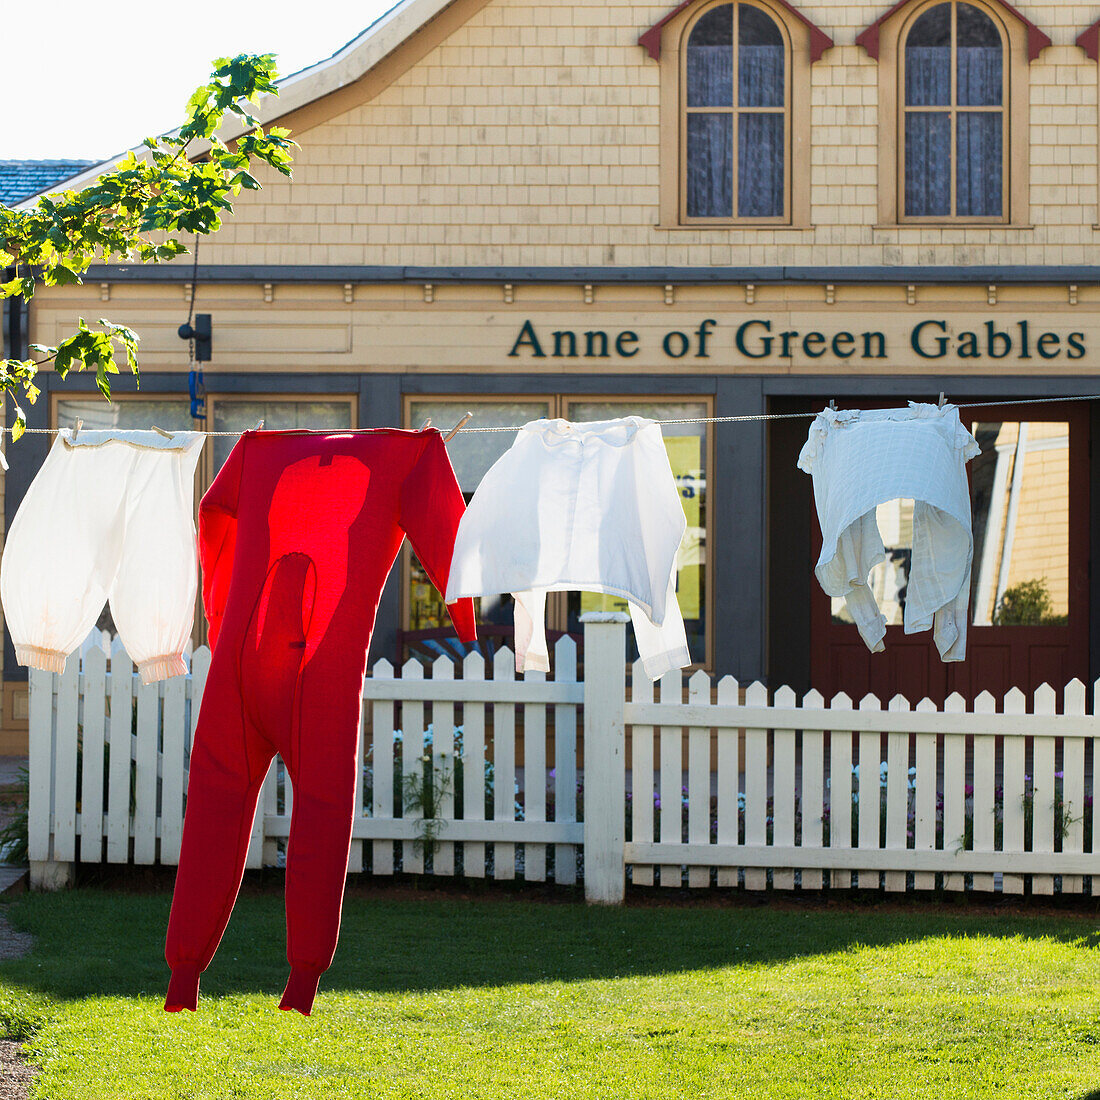 'Clothing hanging on the clothesline in front of a building with an Anne of Green Gables sign; Green Gables, Prince Edward Island, Canada'